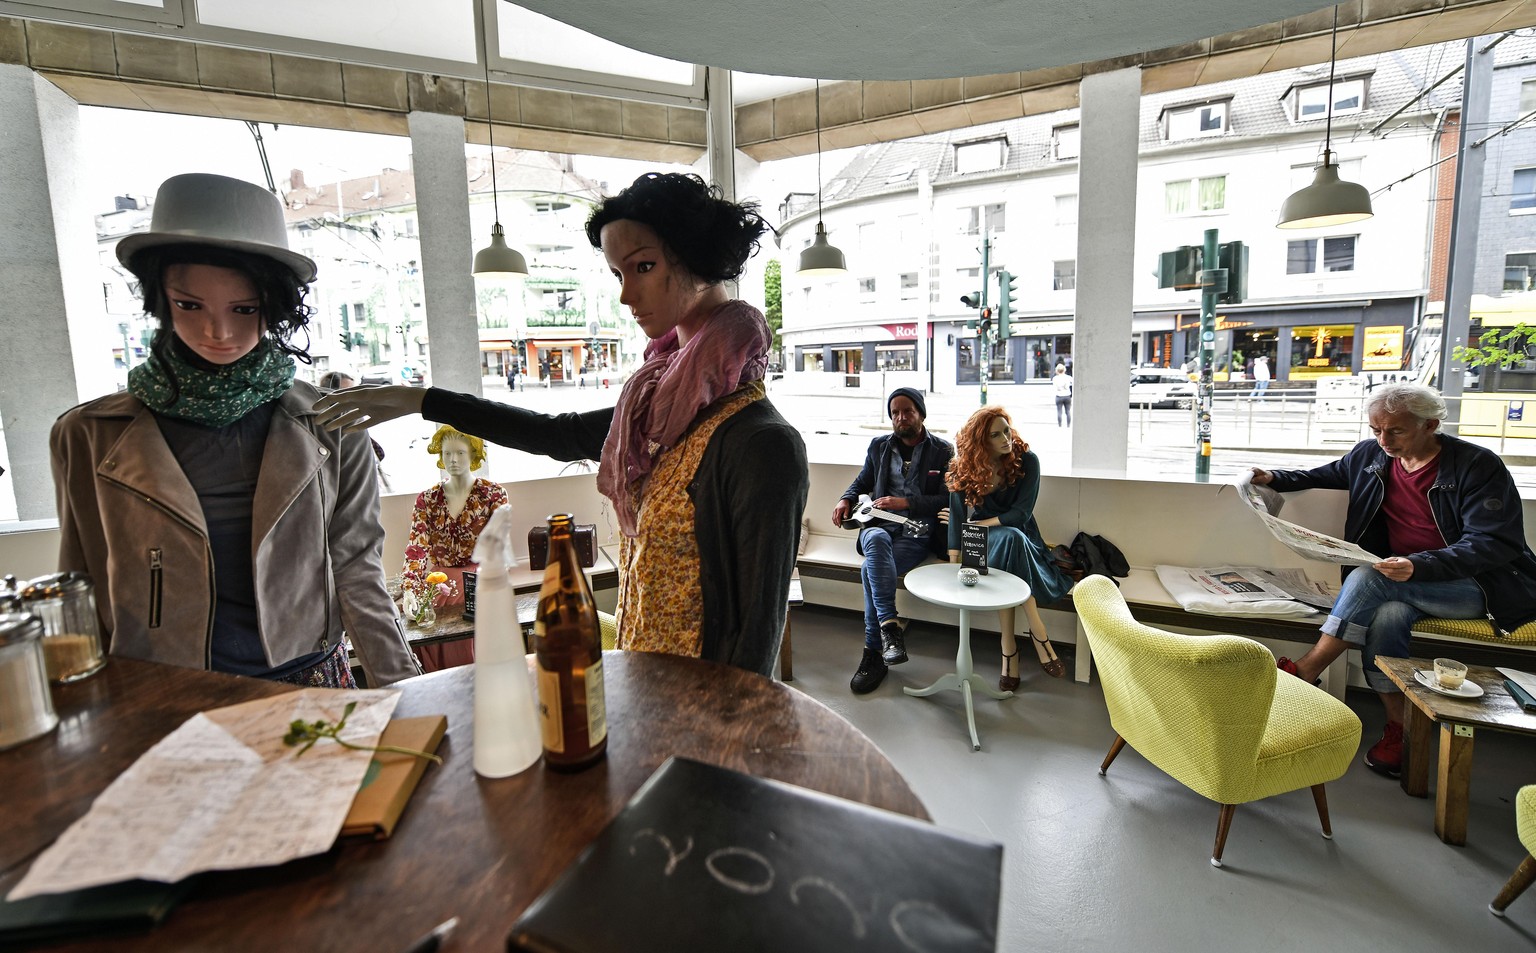 Display mannequins are placed between customers at the Cafe Livres in Essen, Germany, Wednesday, May 20, 2020. The cafe set the dolls as placeholders on various places for more distance between custom ...